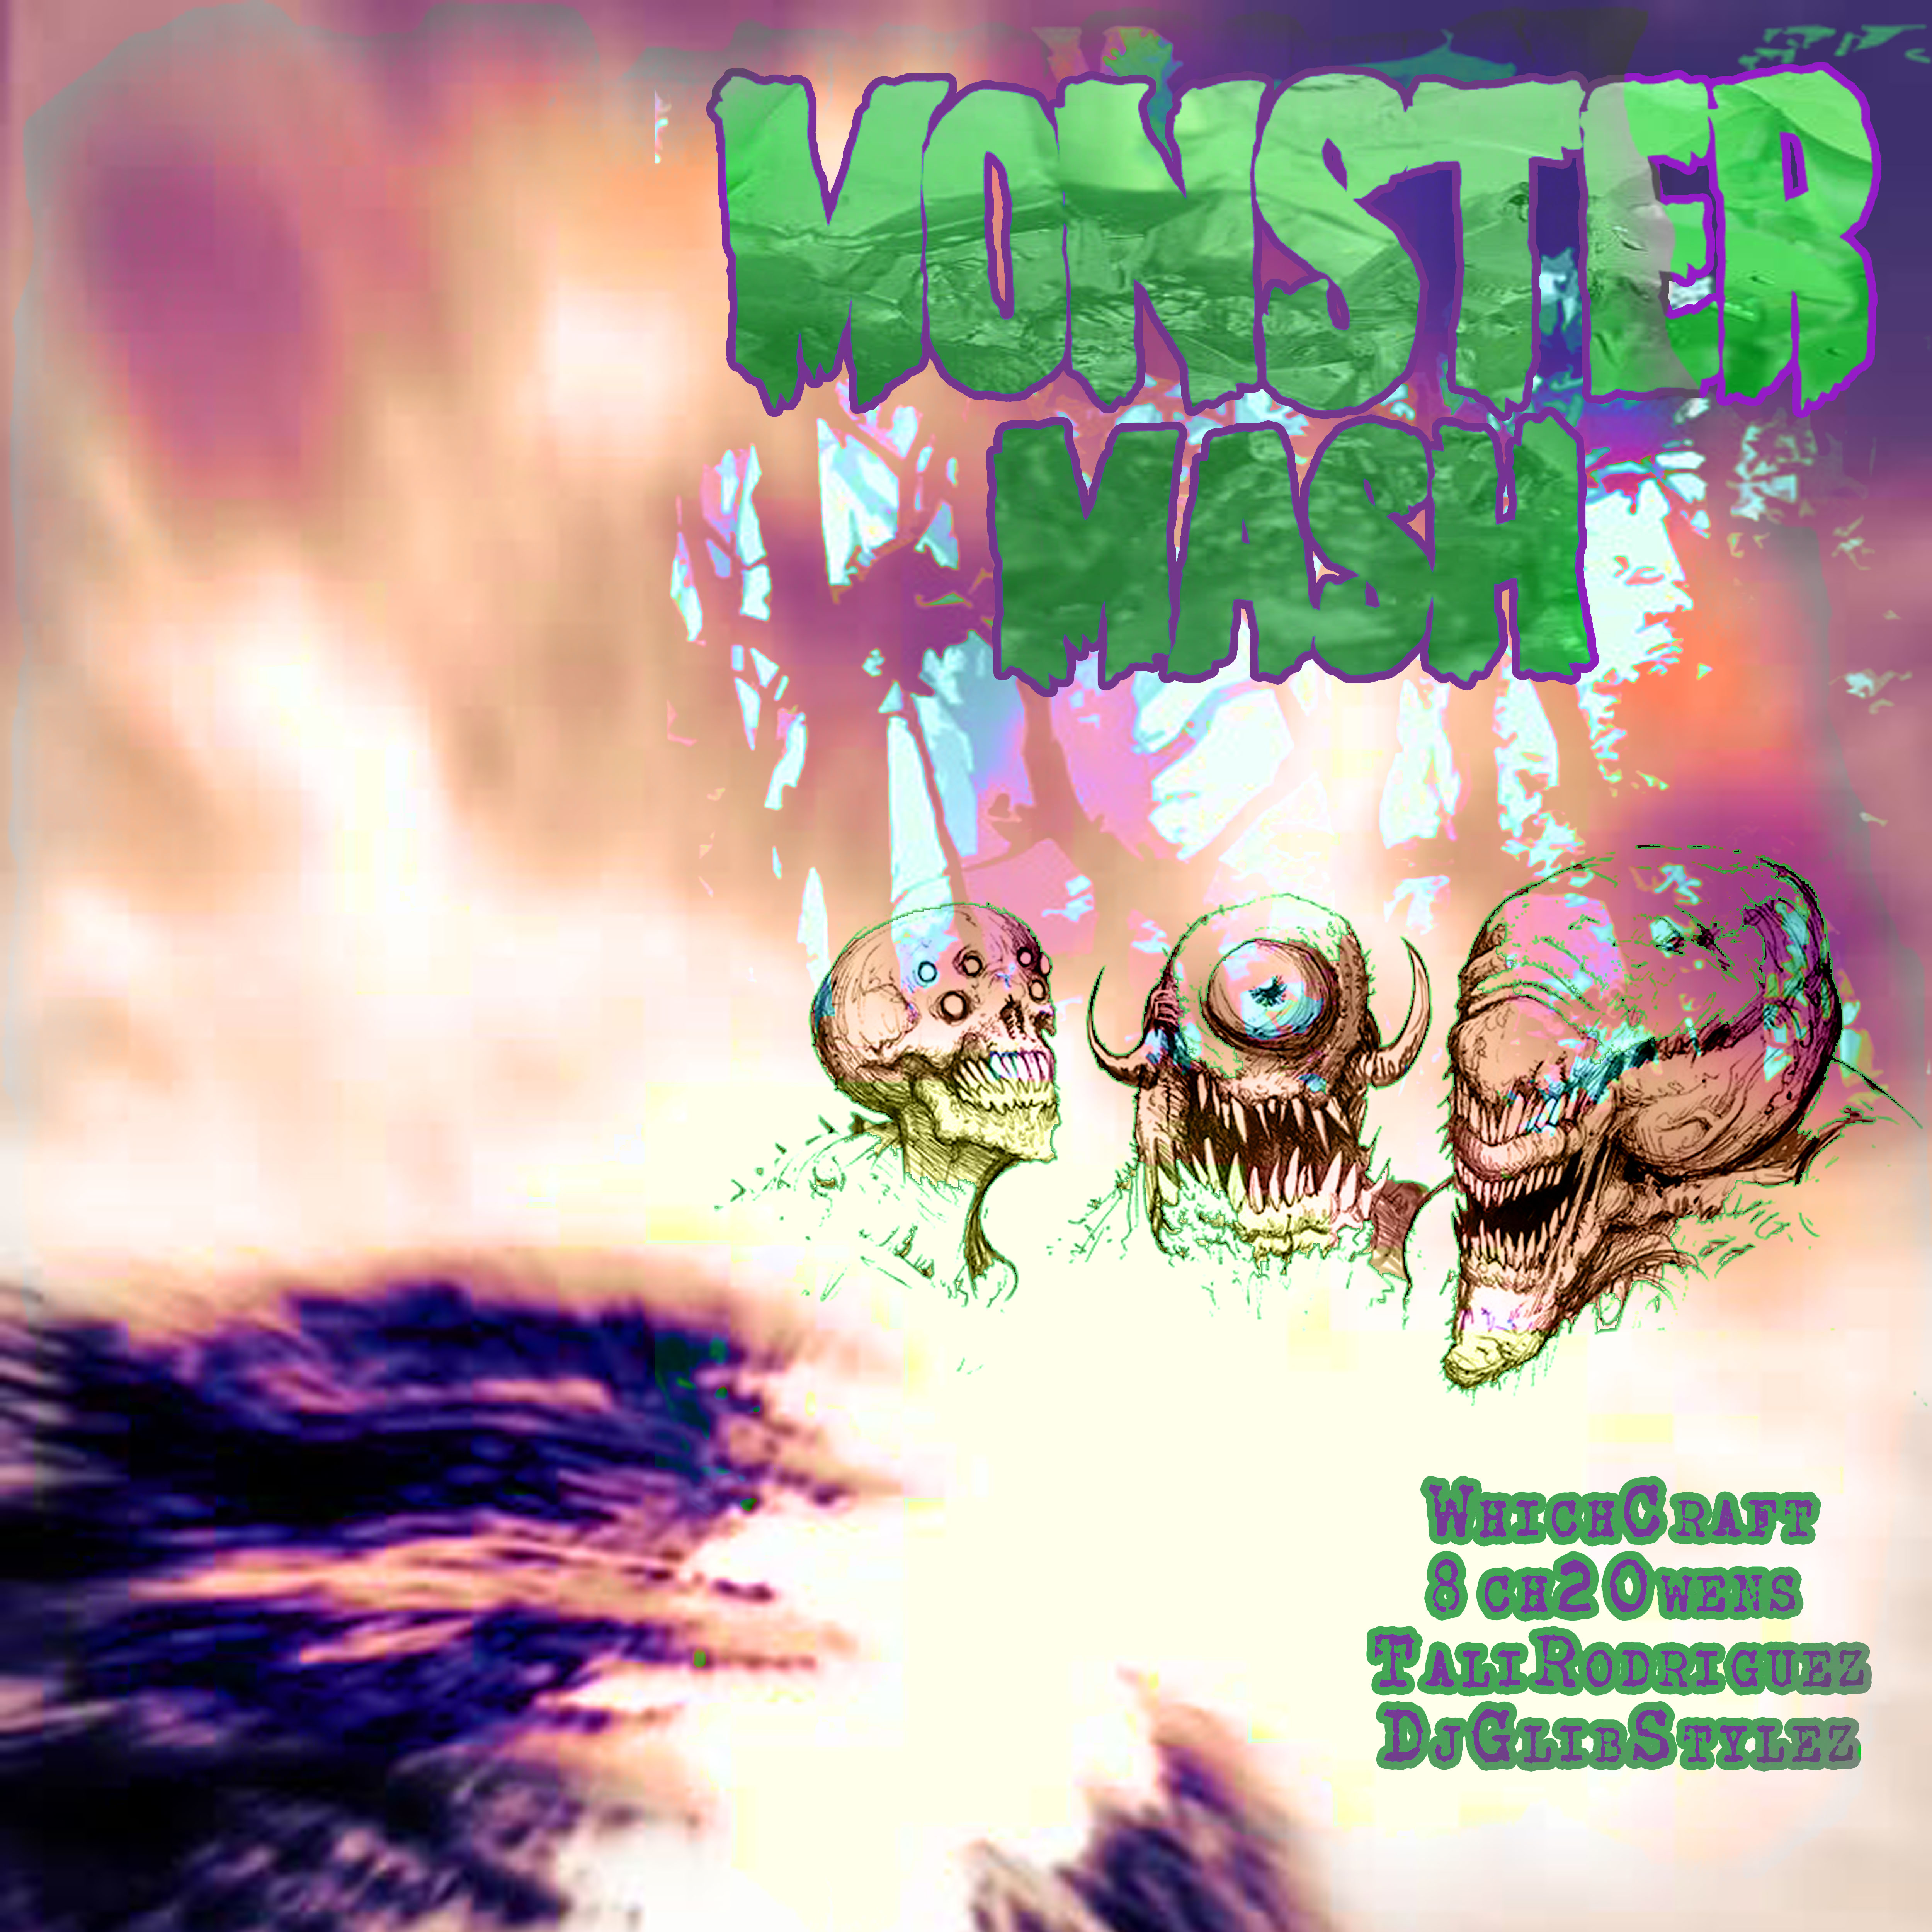 Art for MONSTER MASH Feat 8ch2Owens, Tali Rodriguez, Glibstyles by Whichcraft 